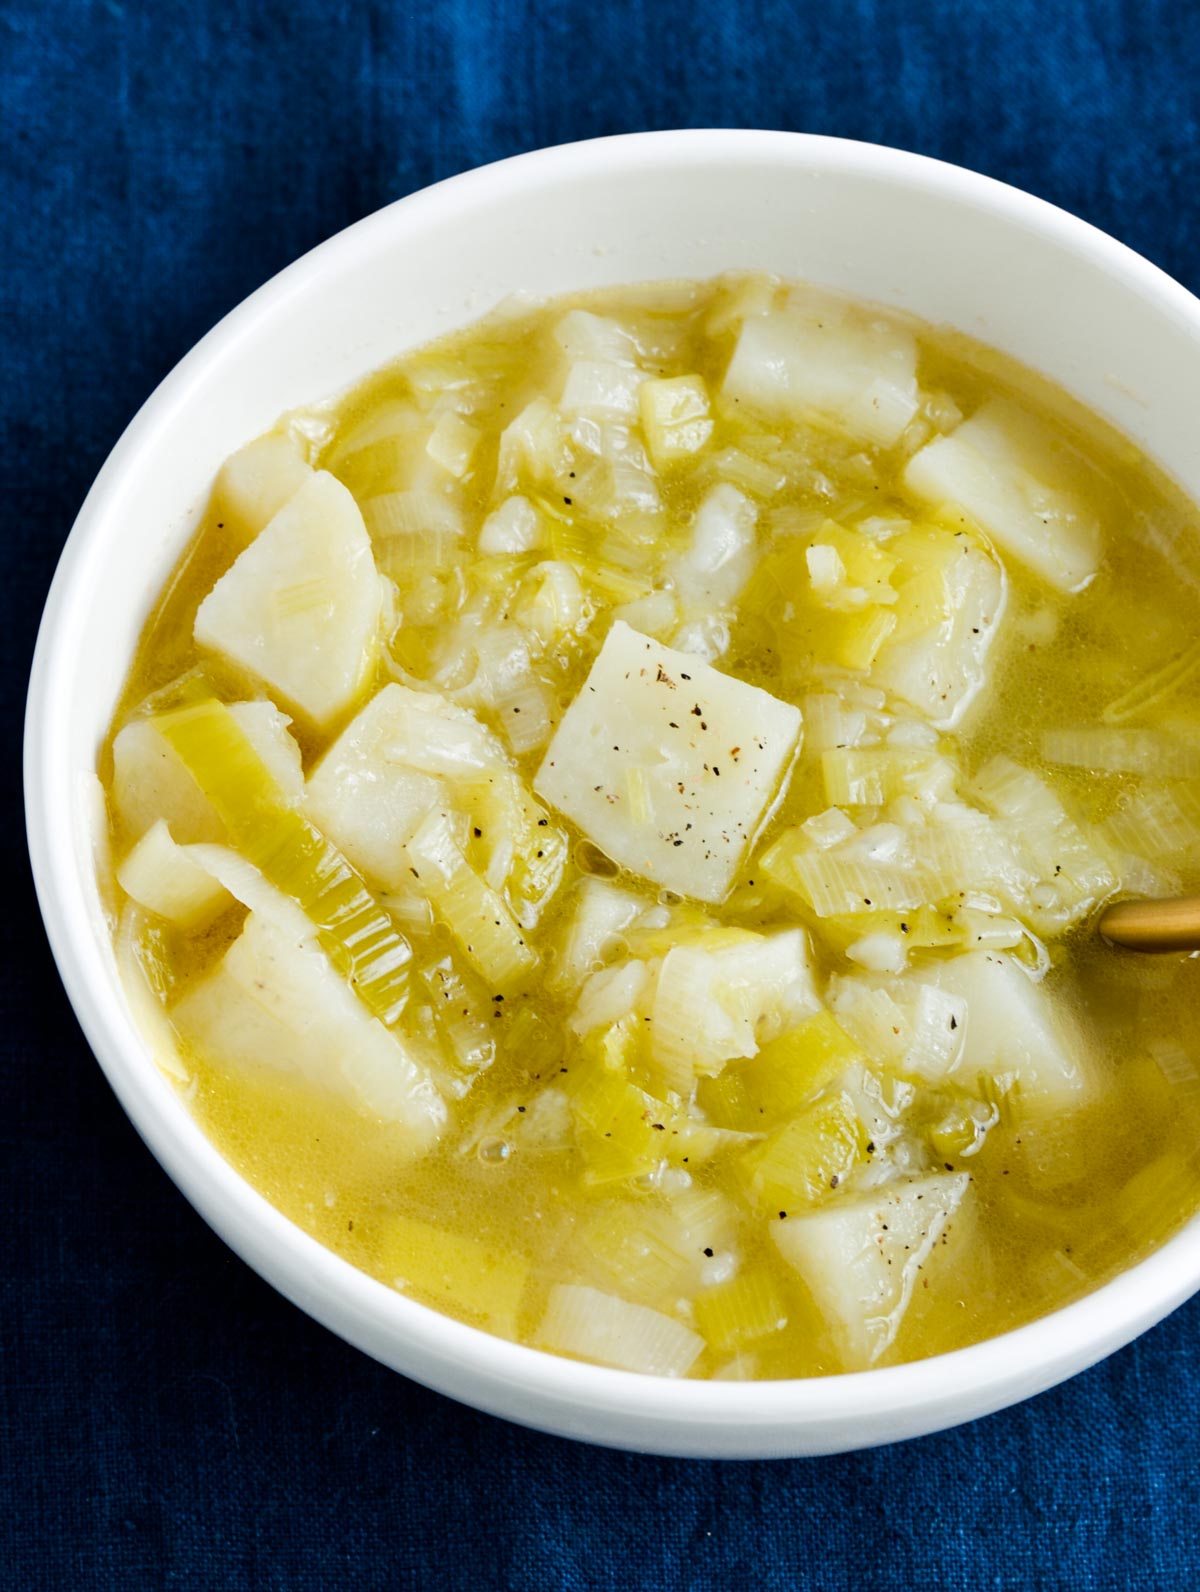 A bowl of leek and potato soup with chicken broth.